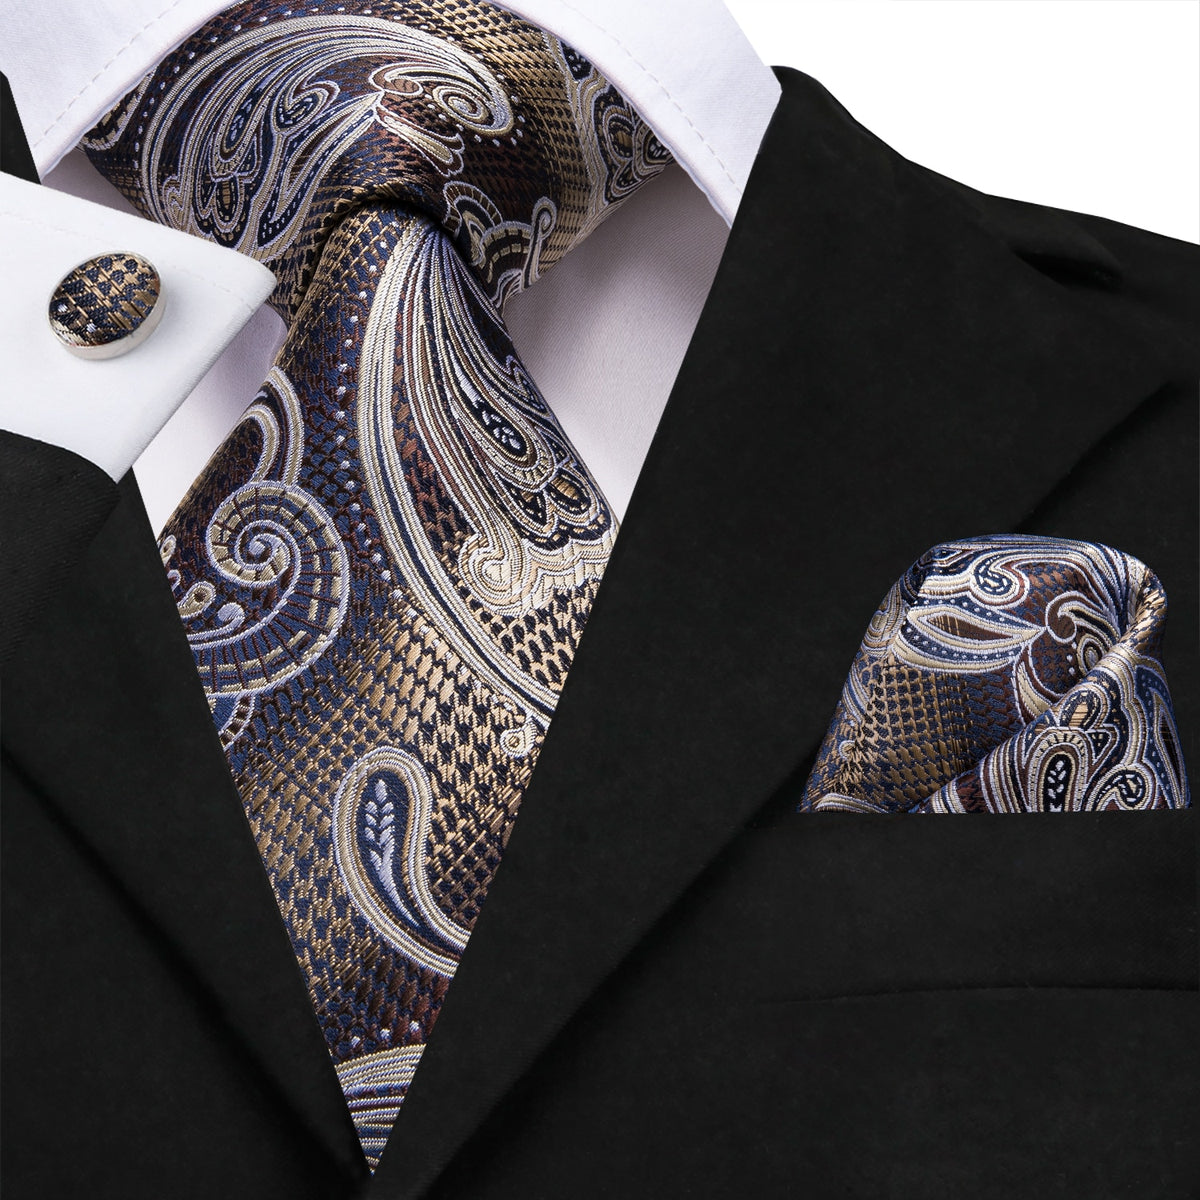 Business Flowers Tie, Pocket Square and Cufflinks – Sophisticated Gentlemen